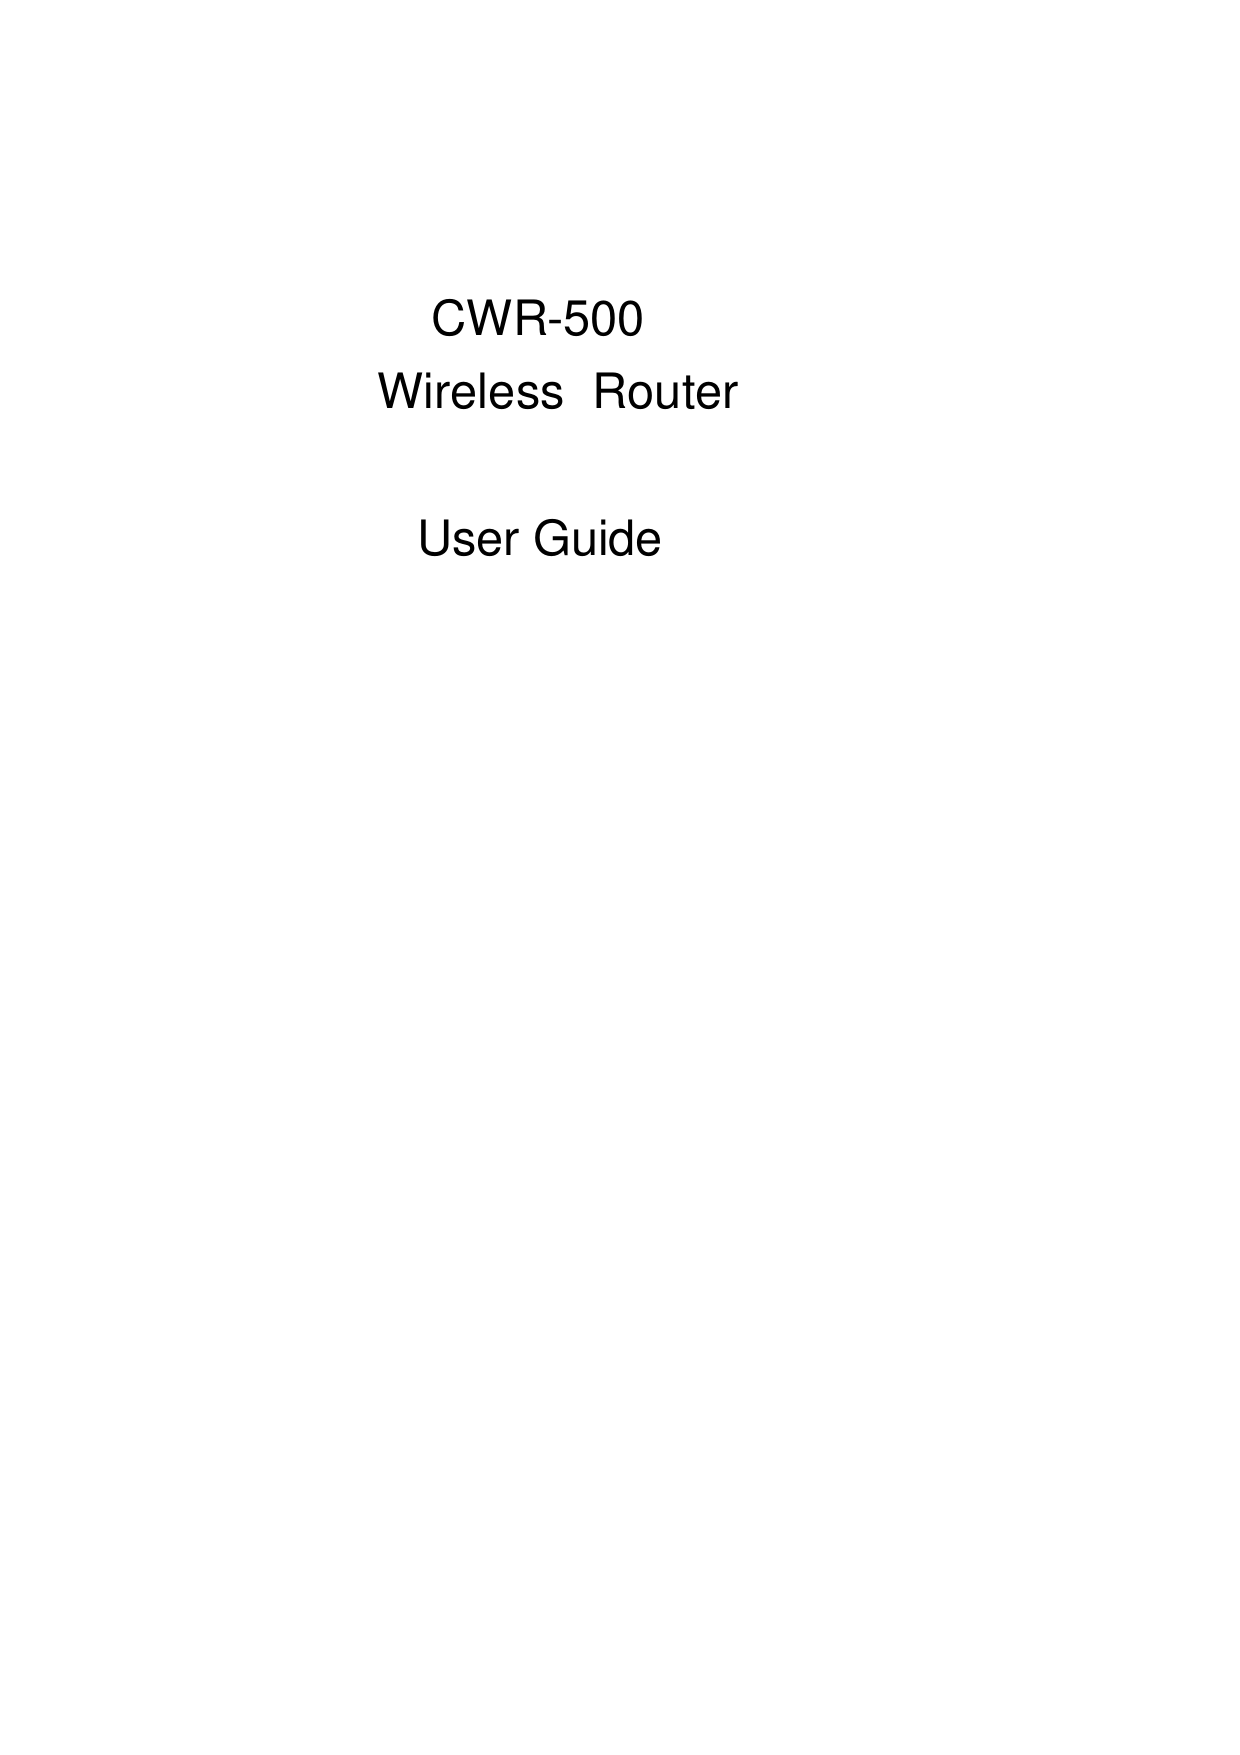  CWR-500   Wireless  Router   User Guide  